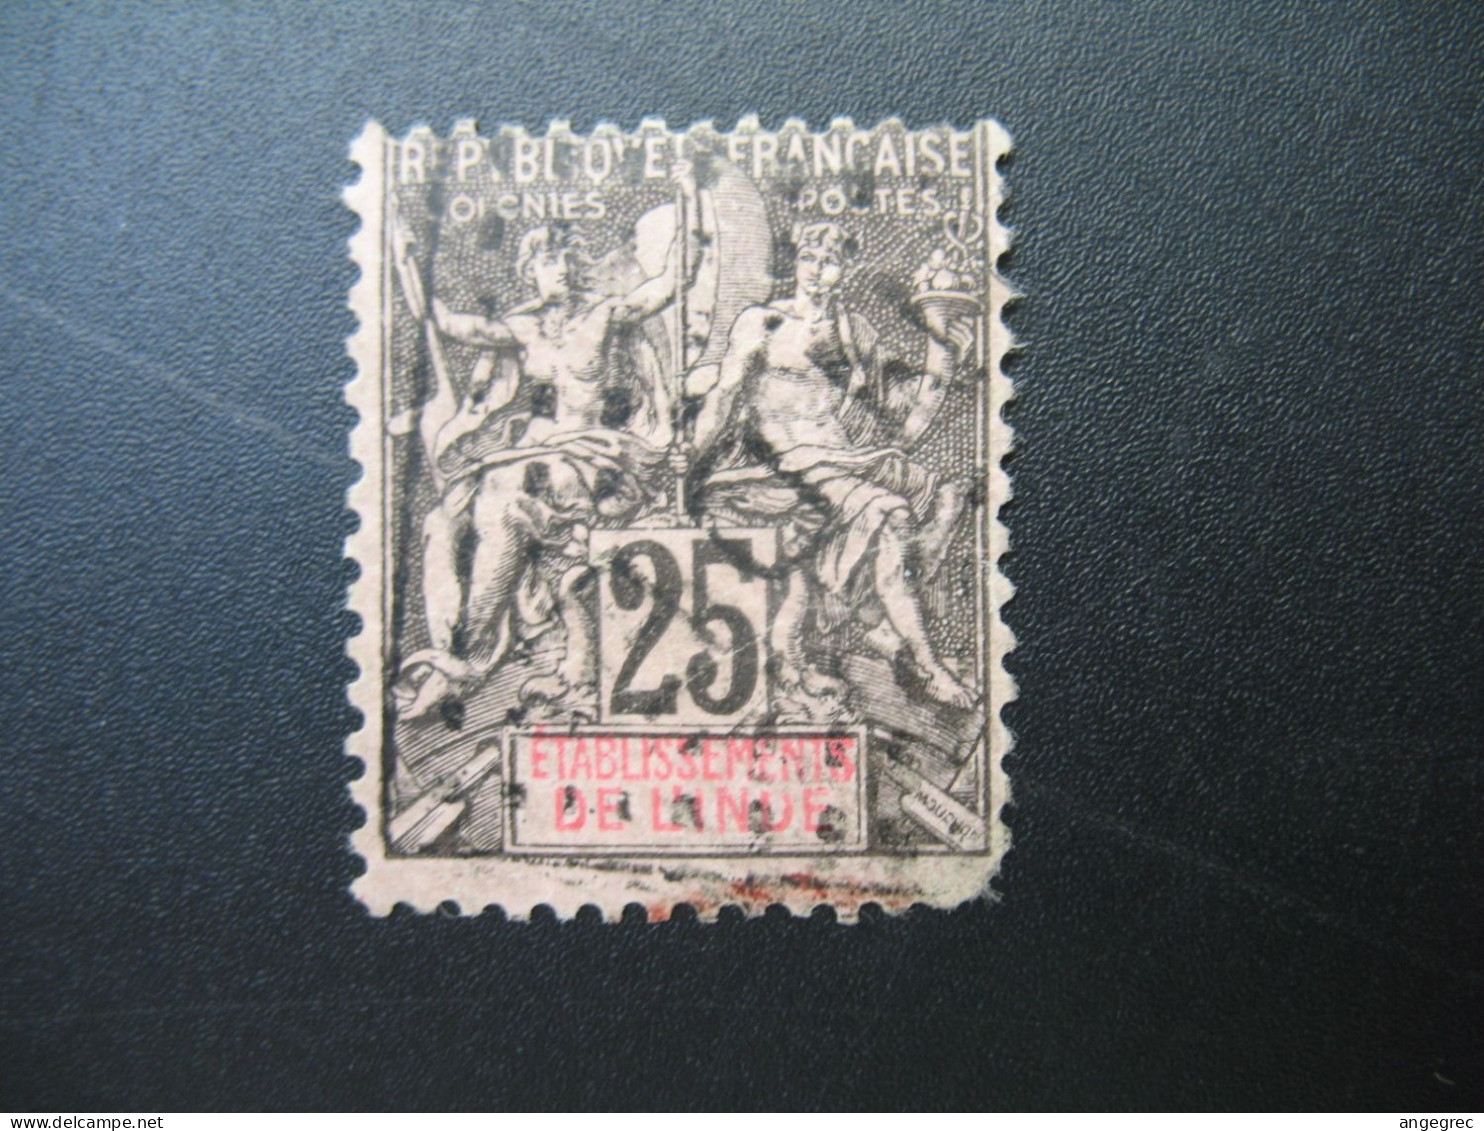 Inde Française Karikal Stamps French Colonies N° 8 Neuf * NSG Maury à Voir - Gebraucht